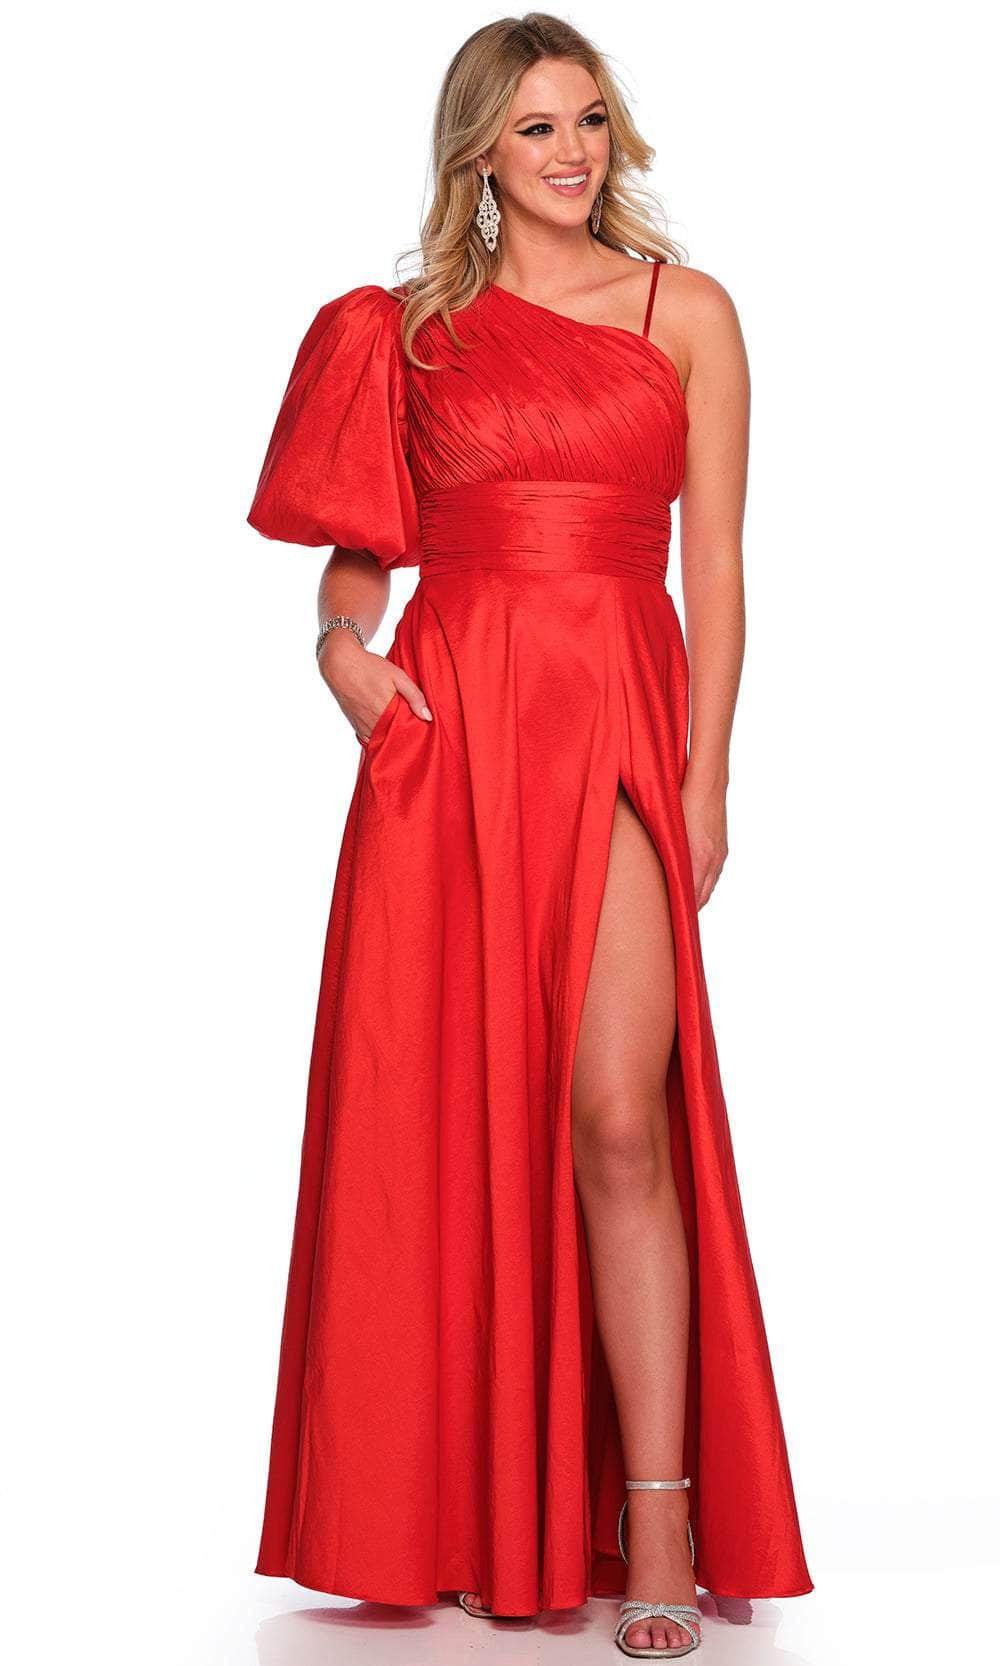 Dave & Johnny 11577 - Ruched Puff Sleeve Prom Gown
